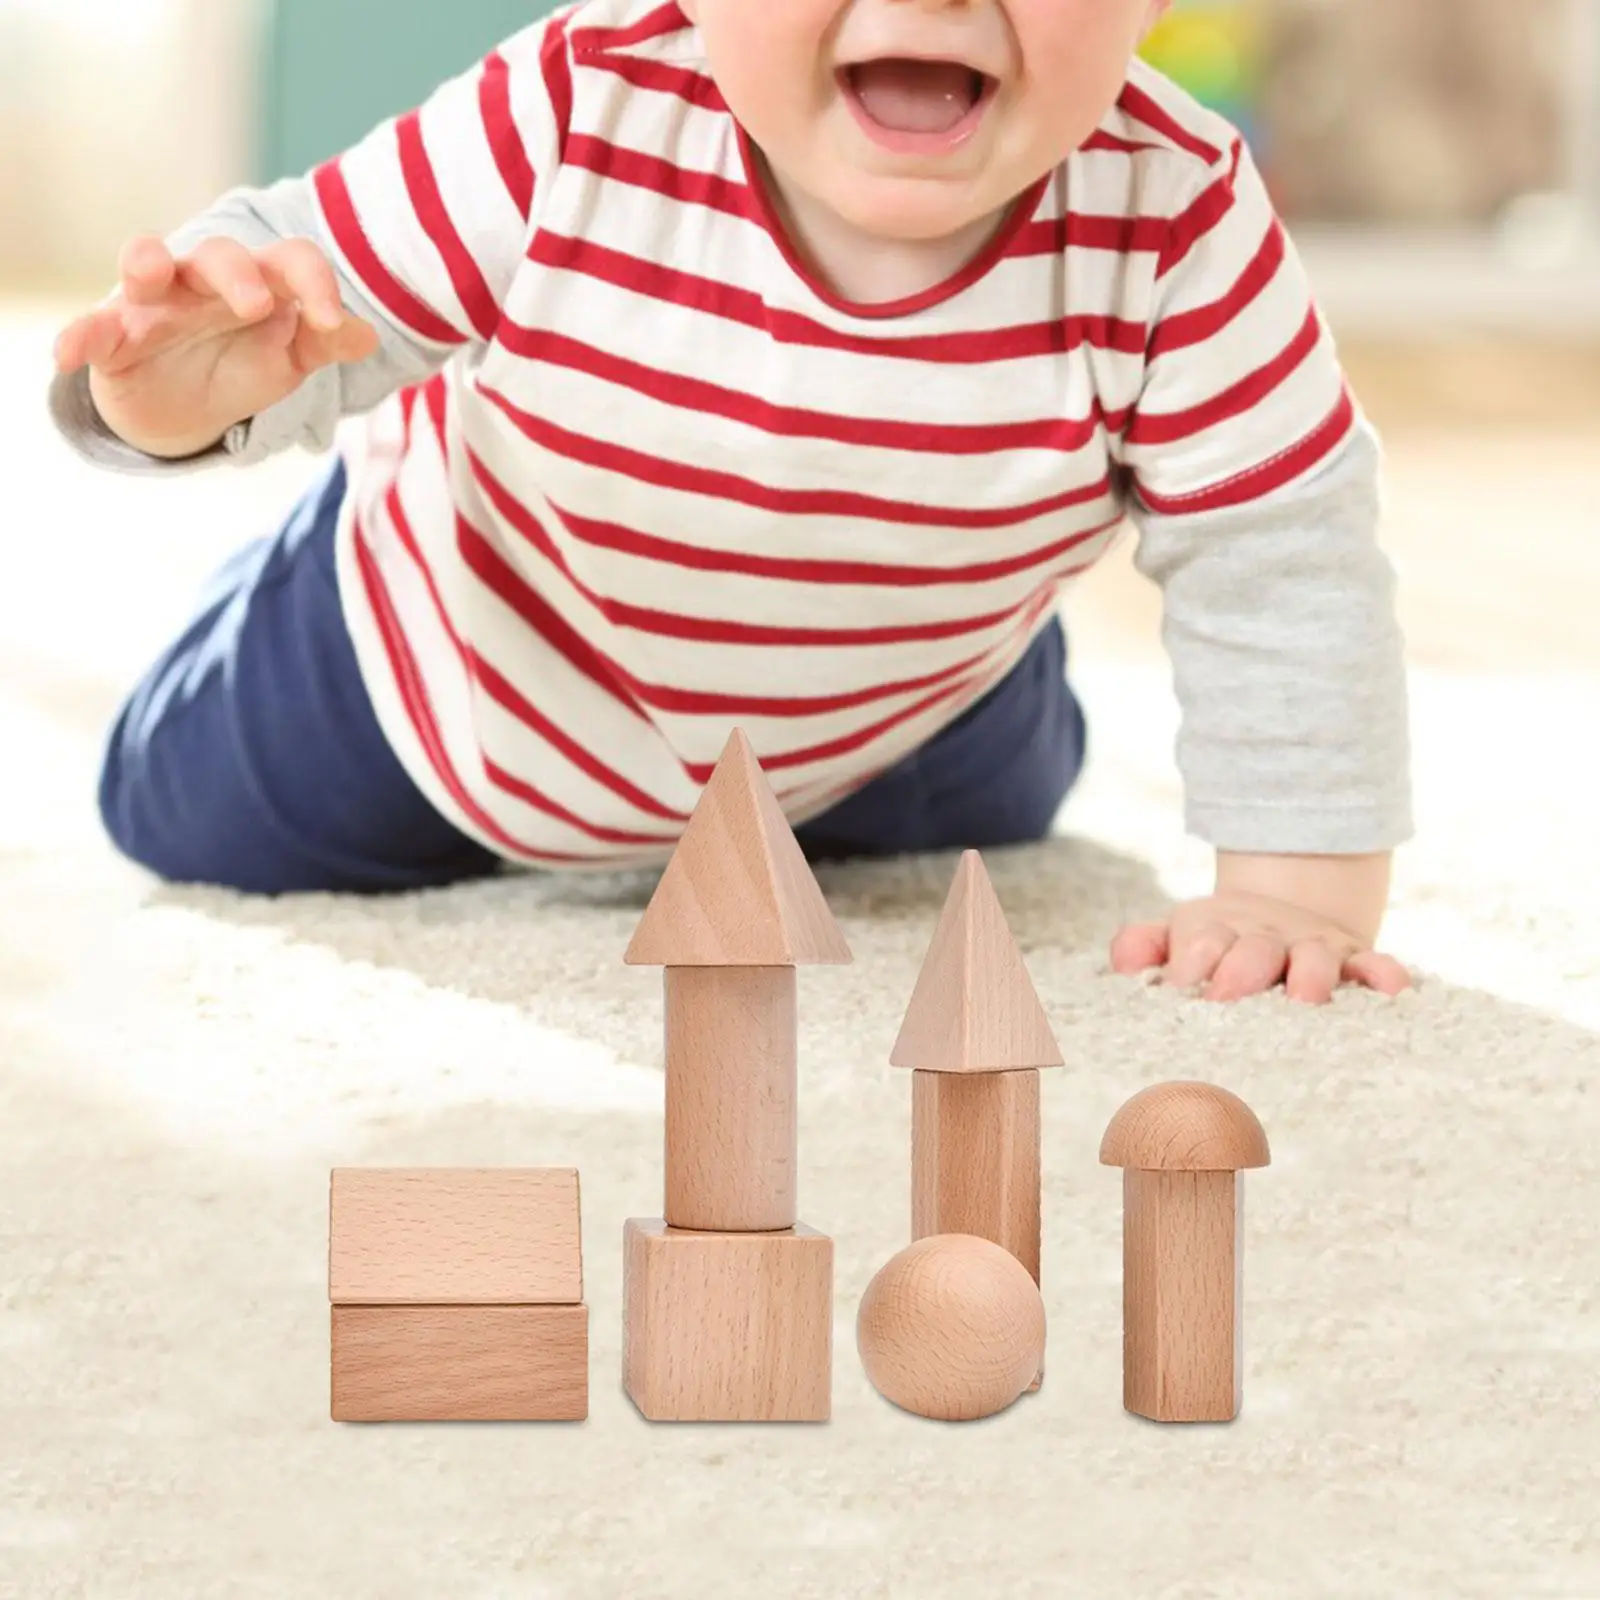 Wood Geometric Solid Blocks Smooth Puzzle Toy 3D Shapes Multifunction Sturdy Educational Toys for Home Preschool Classroom Baby